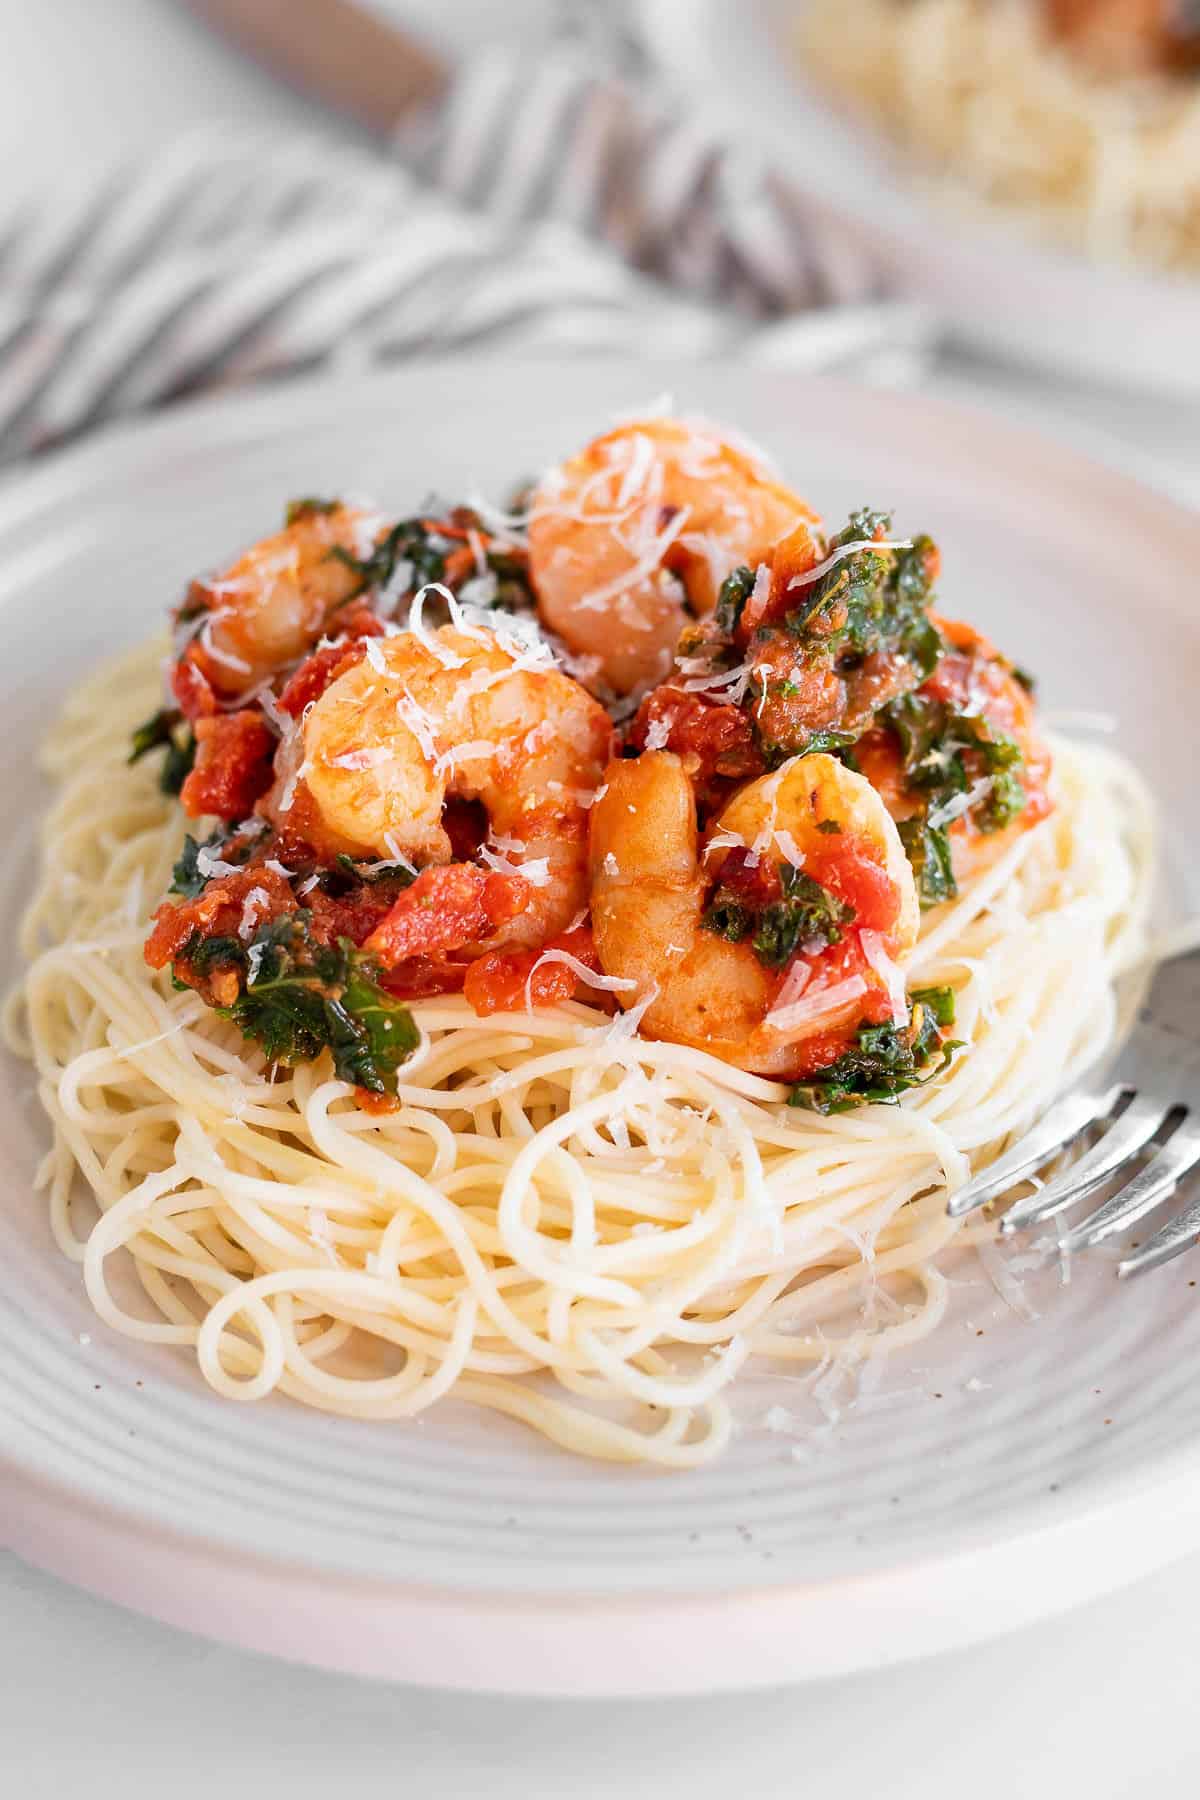 Spicy shrimp and kale served over angel hair pasta on a white plate.